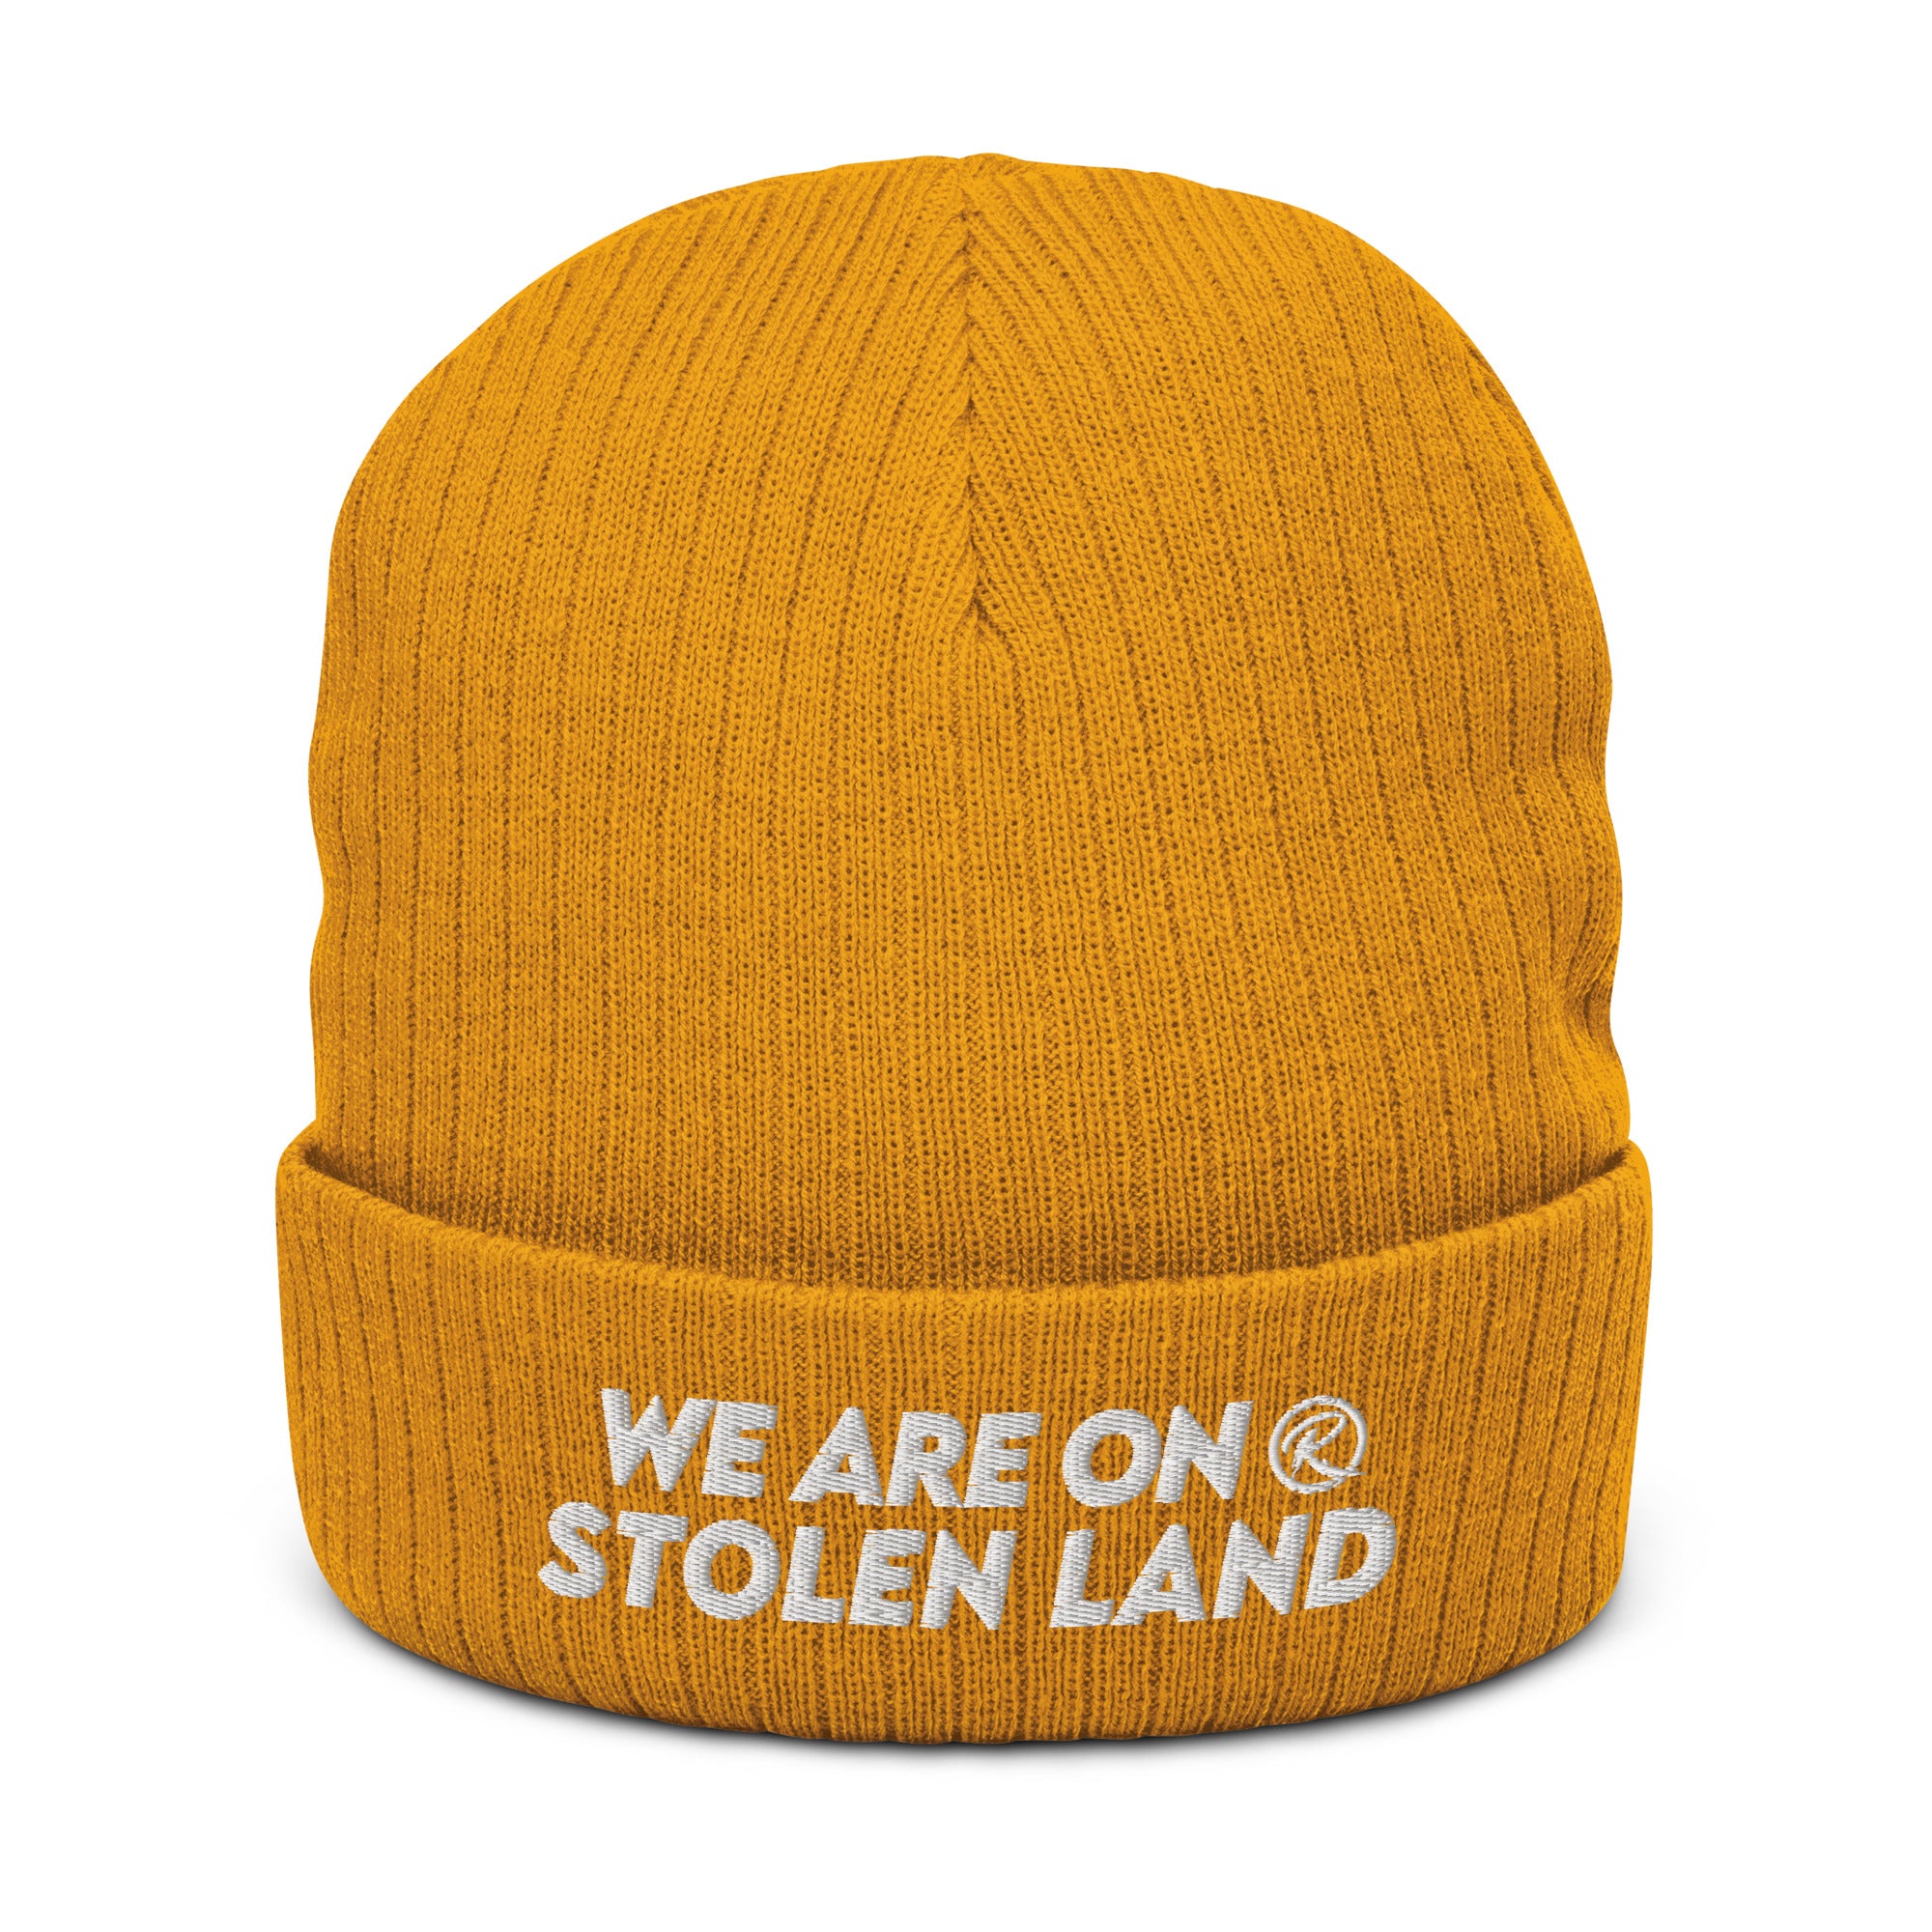 We are on stolen land | Ribbed knit beanie (50% Recycled Polyester)